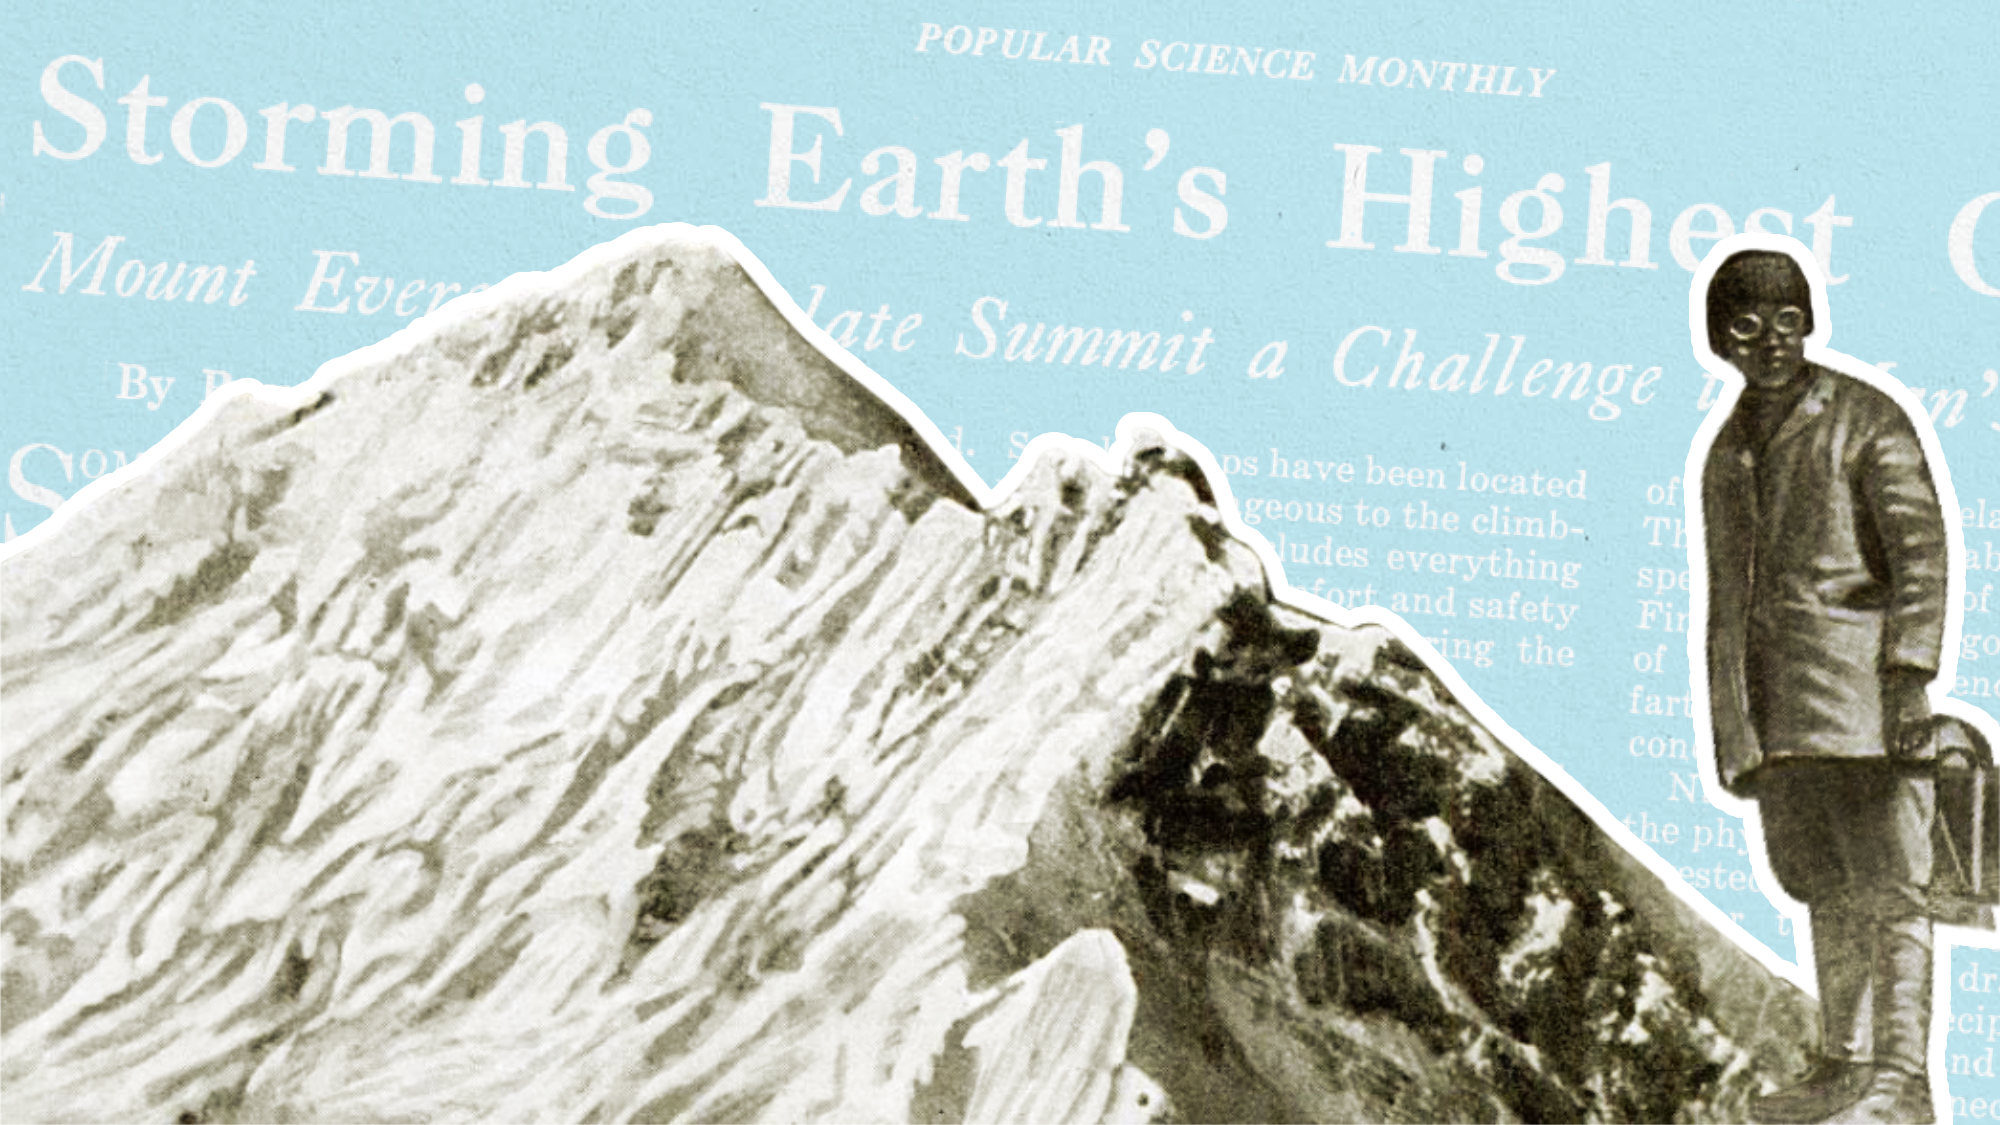 May 1924: Popular Science profiles George Mallory’s tragic quest to conquer Everest